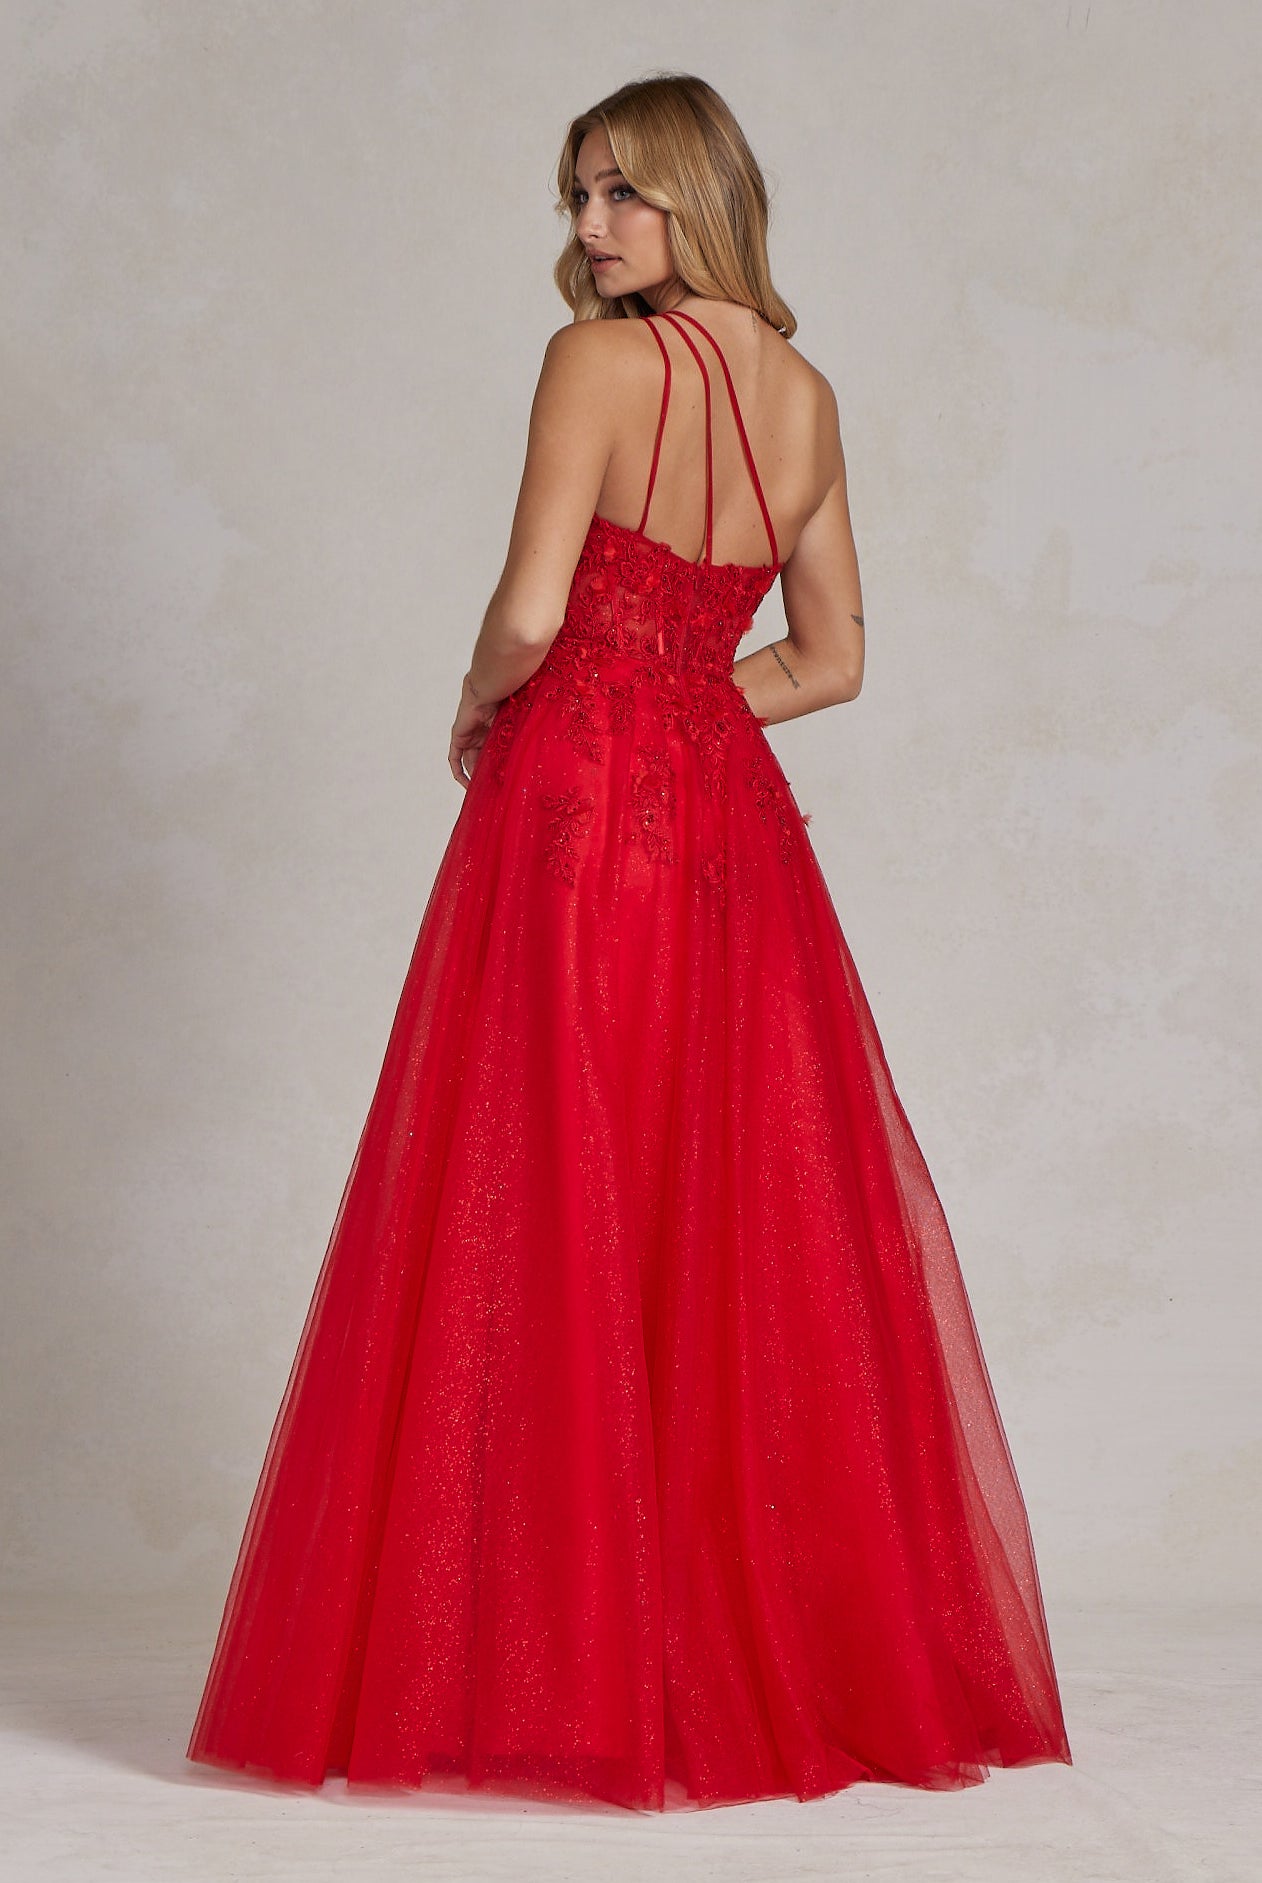 A-Line Embroidered Bodice Halter Open Back Long Prom Dress NXT1143-Prom Dress-smcfashion.com